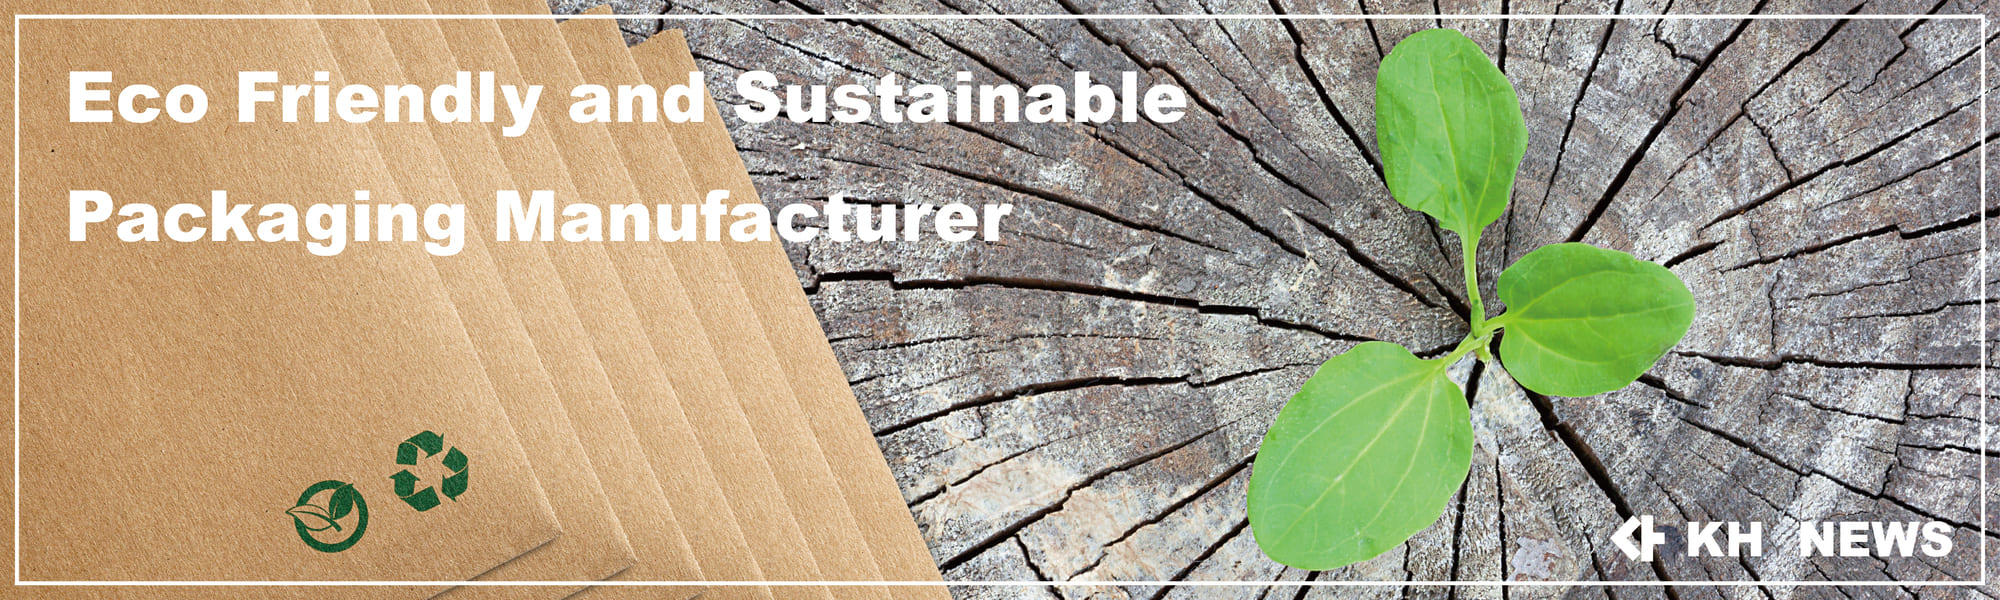 Eco Friendly and Sustainable Packaging Manufacturer